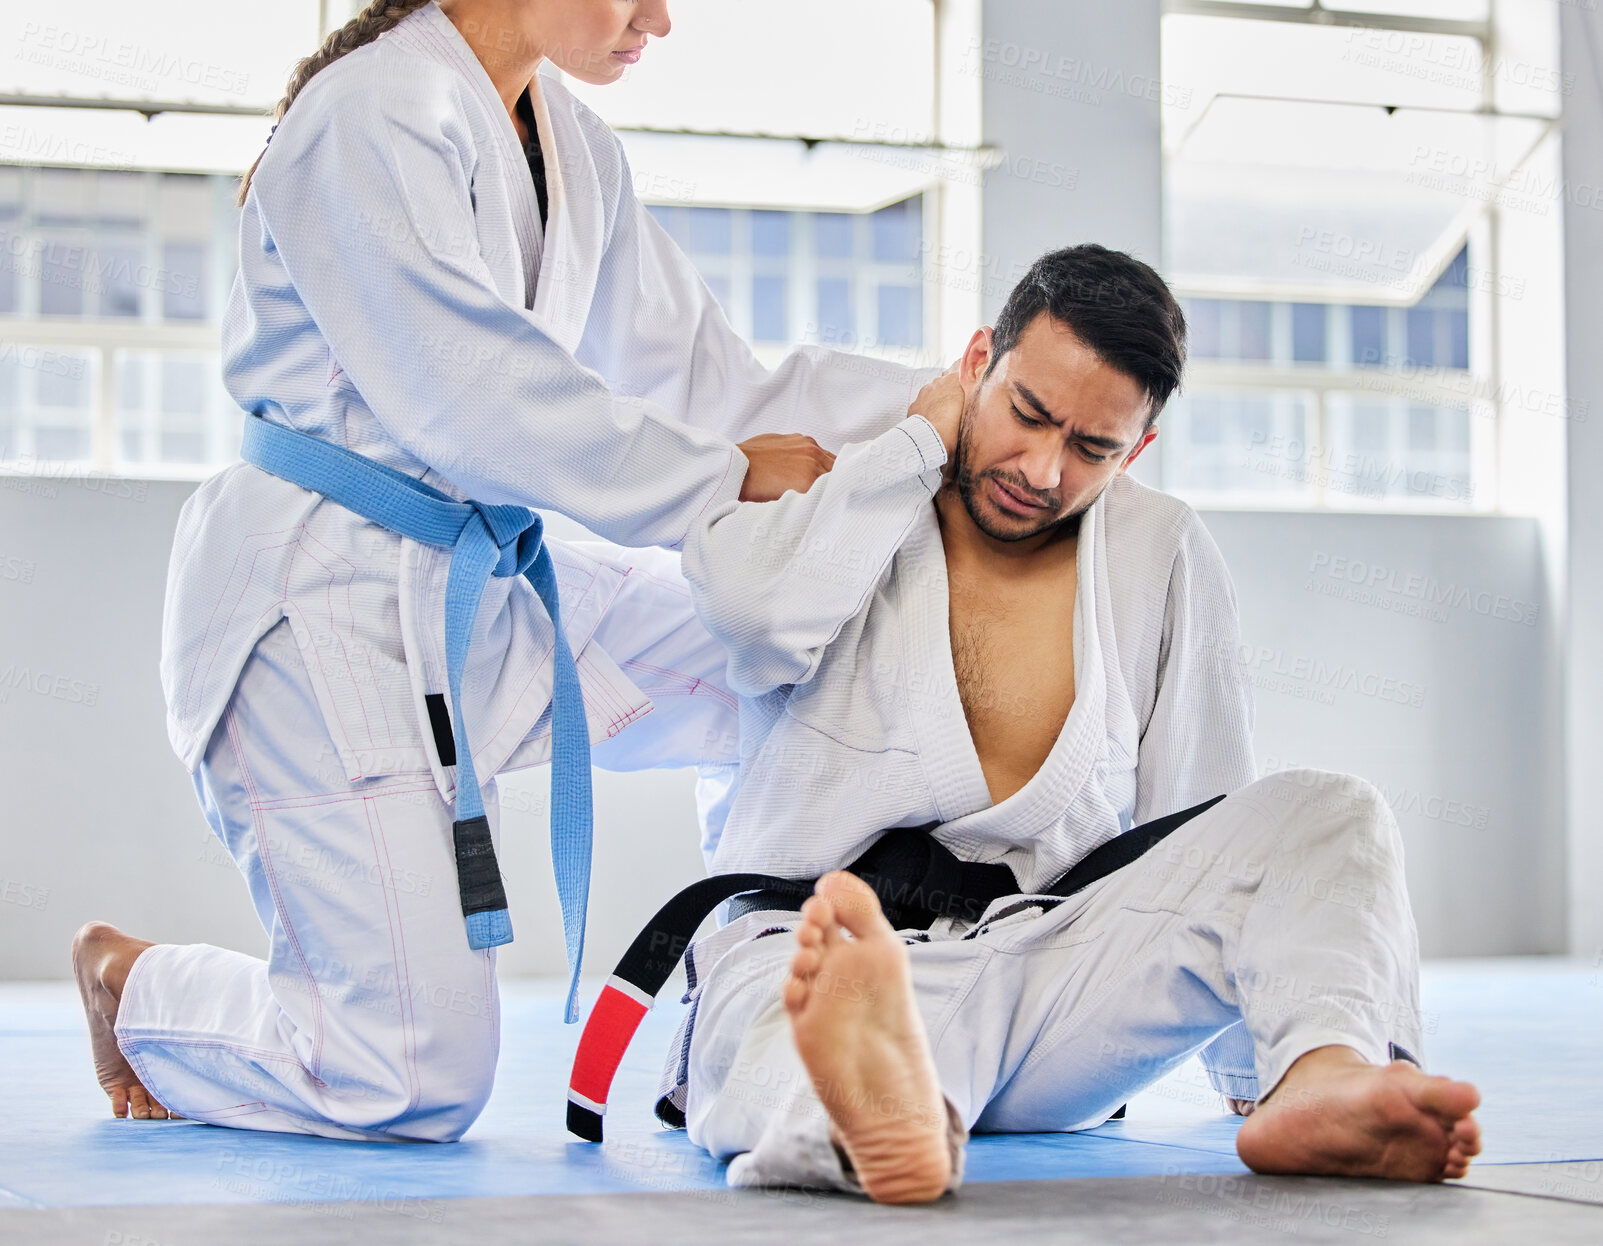 Buy stock photo Karate, neck pain and man with an injury in sports training, exercise or body workout hurt in an accident. Problem, emergency and injured martial arts expert or athlete with muscle pain or bruise